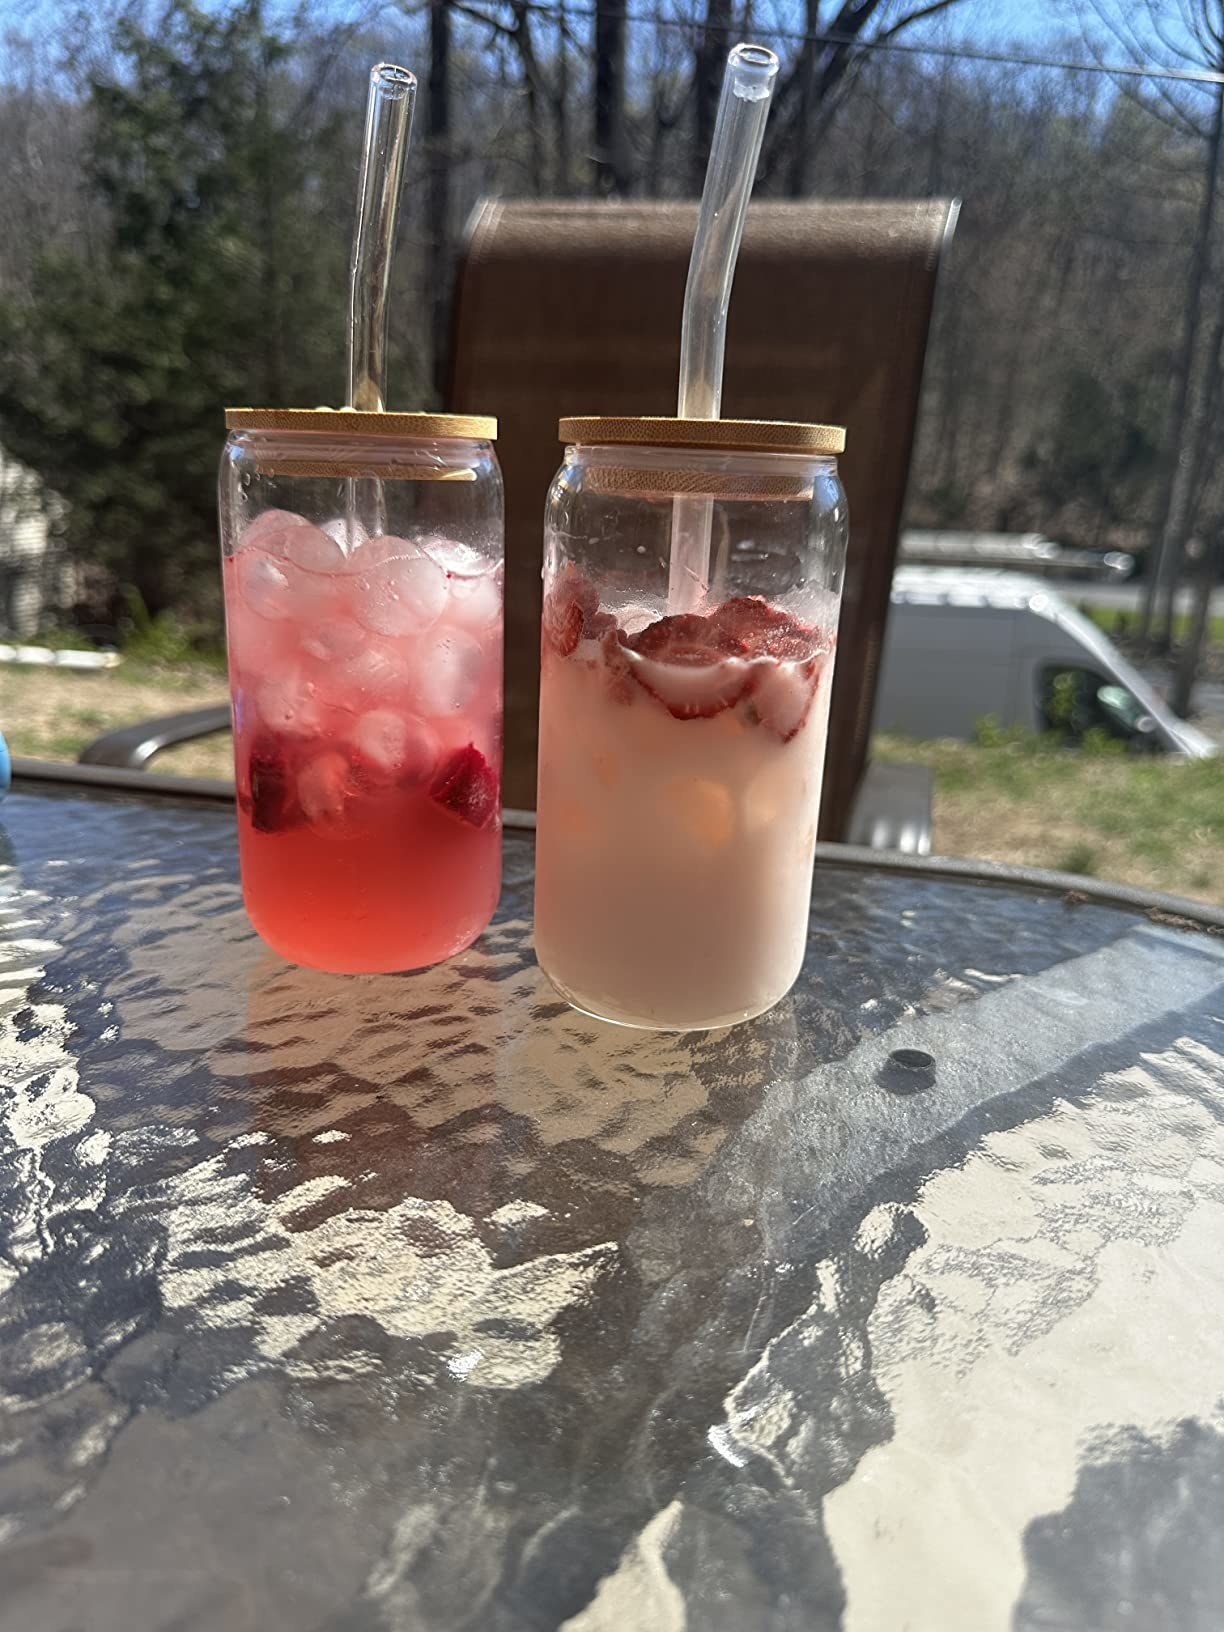 Two glasses sitting on patio table filled with cold drinks and ice and secured with wooden lid and straws